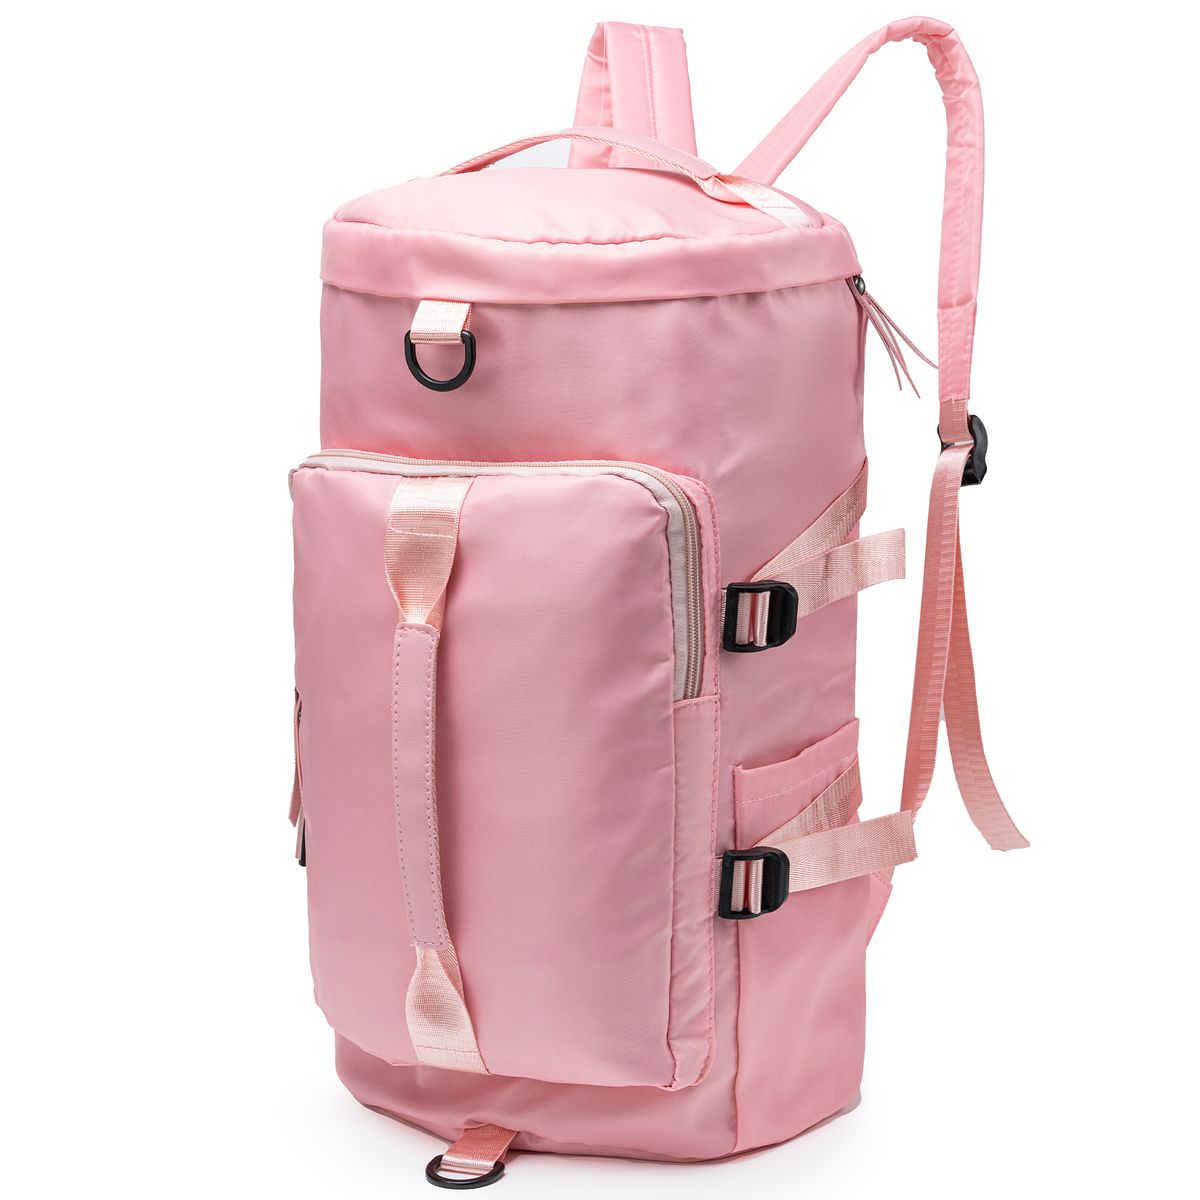 Women Backpack Travel Luggage Bag Sports&amp; Gym Bag with Shoe Compartment-30L